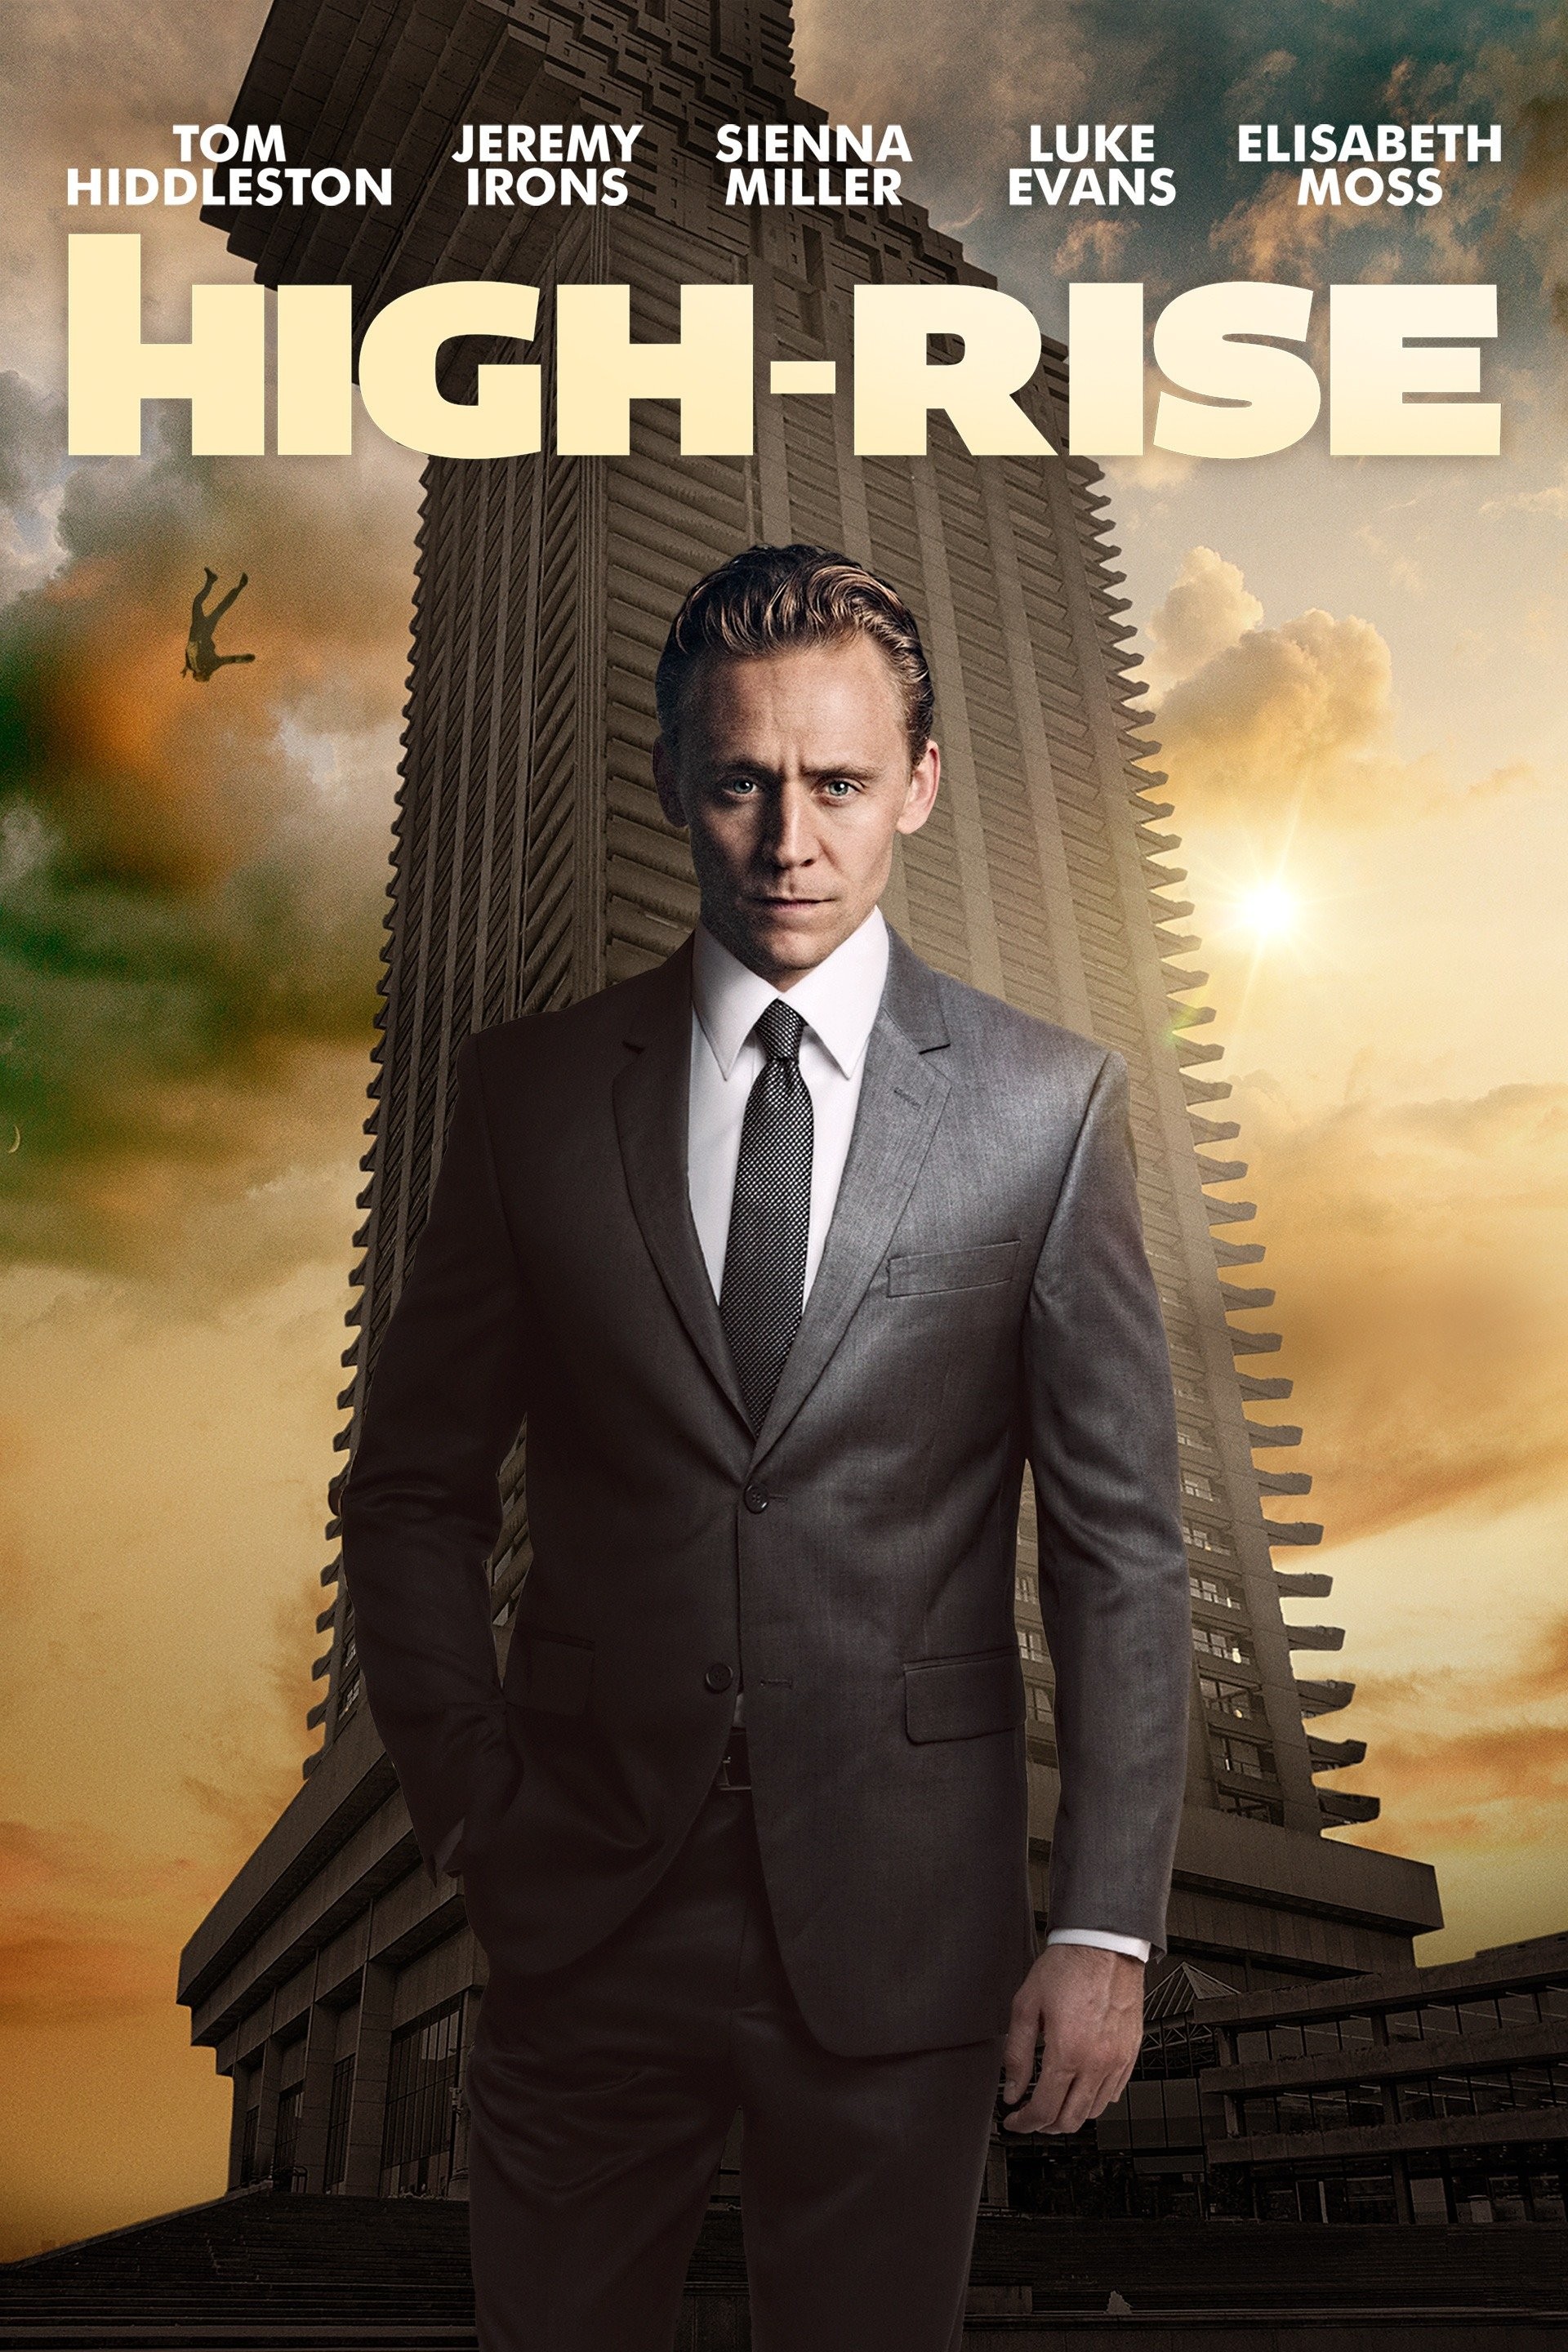 High-Rise  Rotten Tomatoes